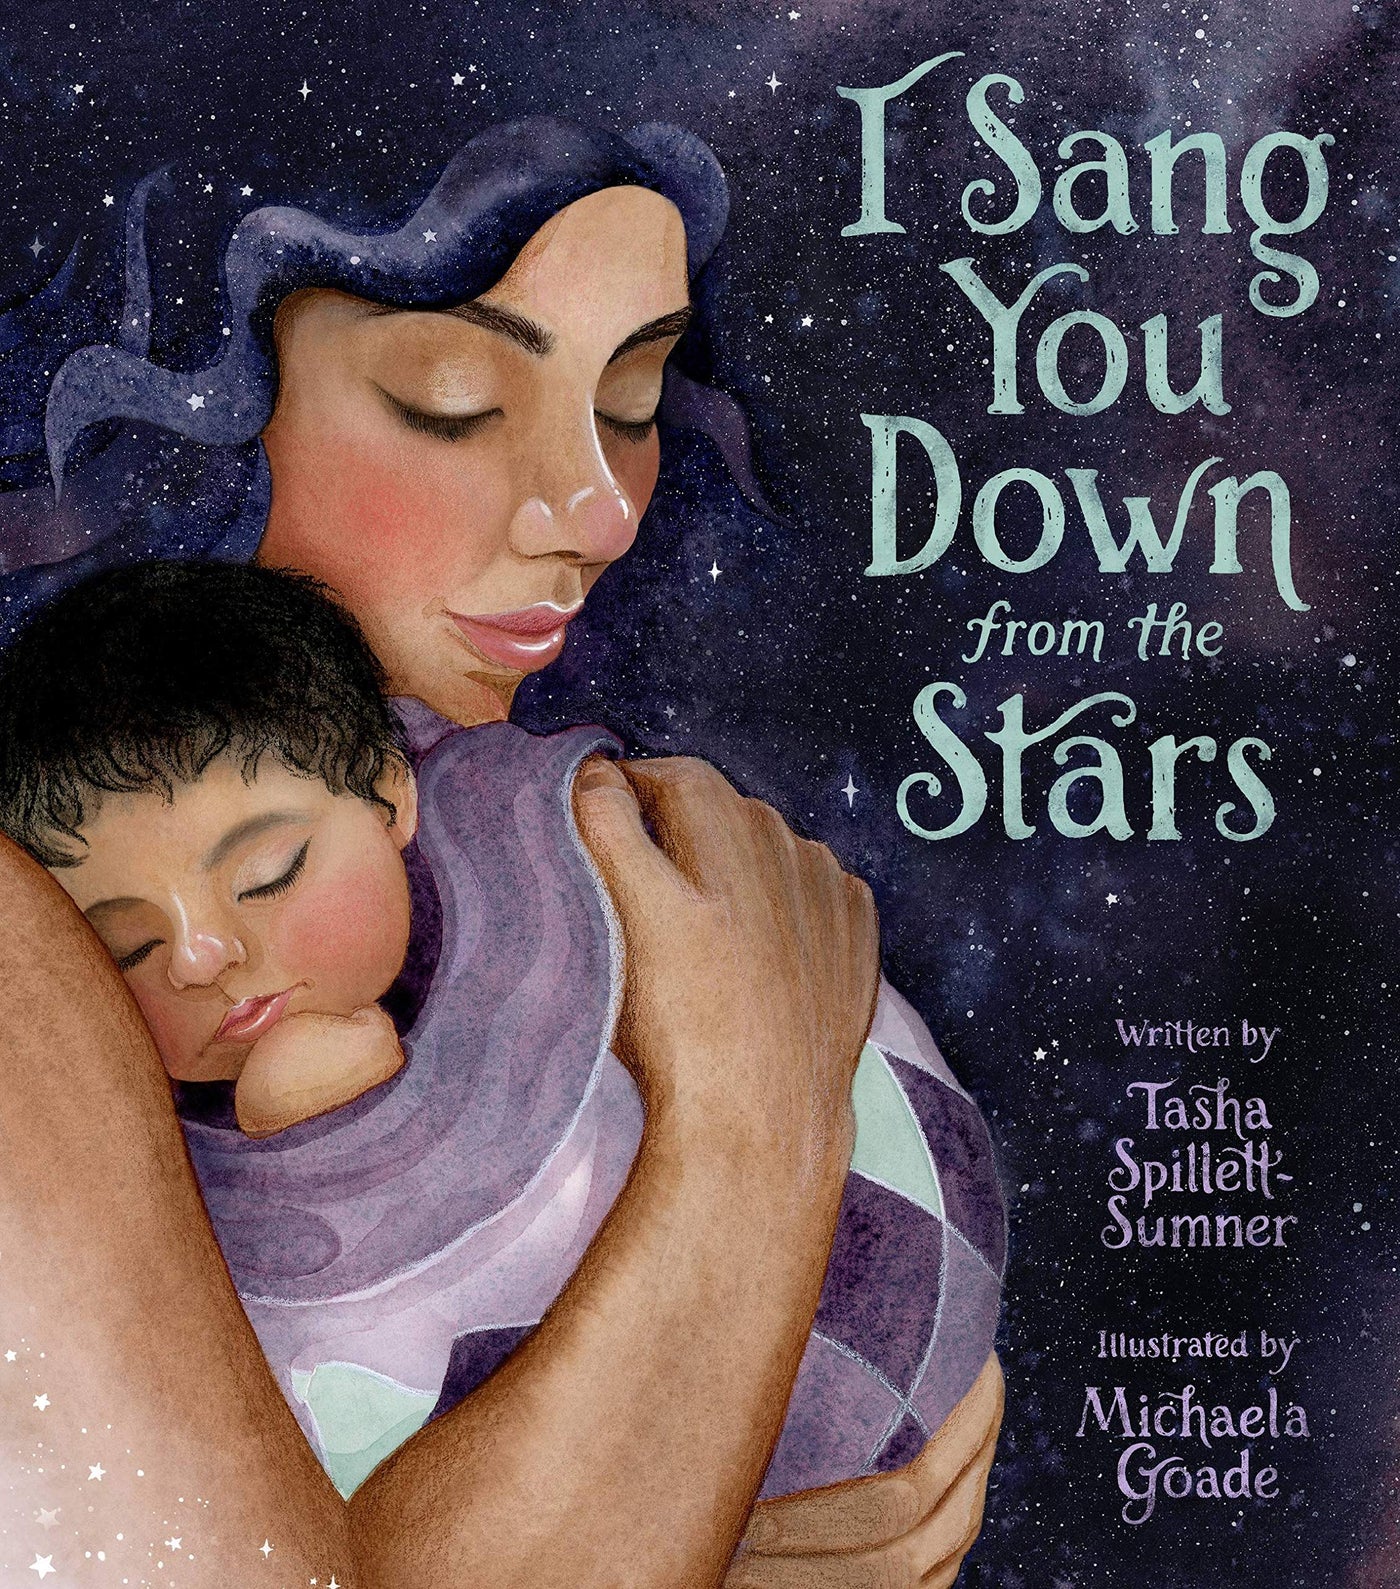 I Sang You Down from the Stars, by Tasha Spillett-Sumner, illustrated by Michela Goade